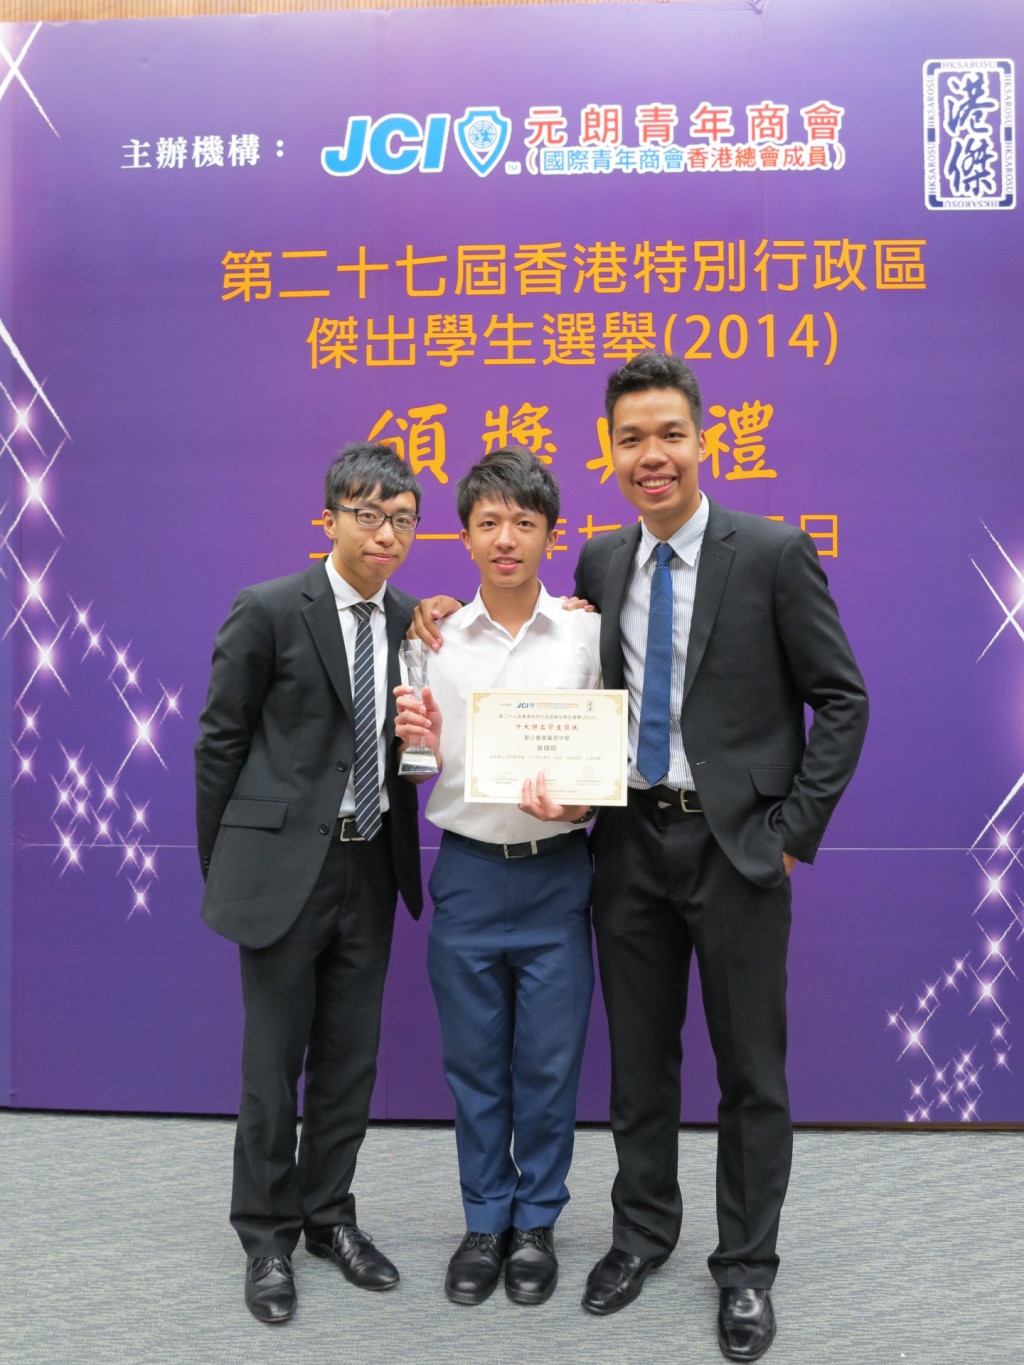 The 27th HKSAR OUTSTANDING STUDENTS SELECTION_3_3 SU Chairmen